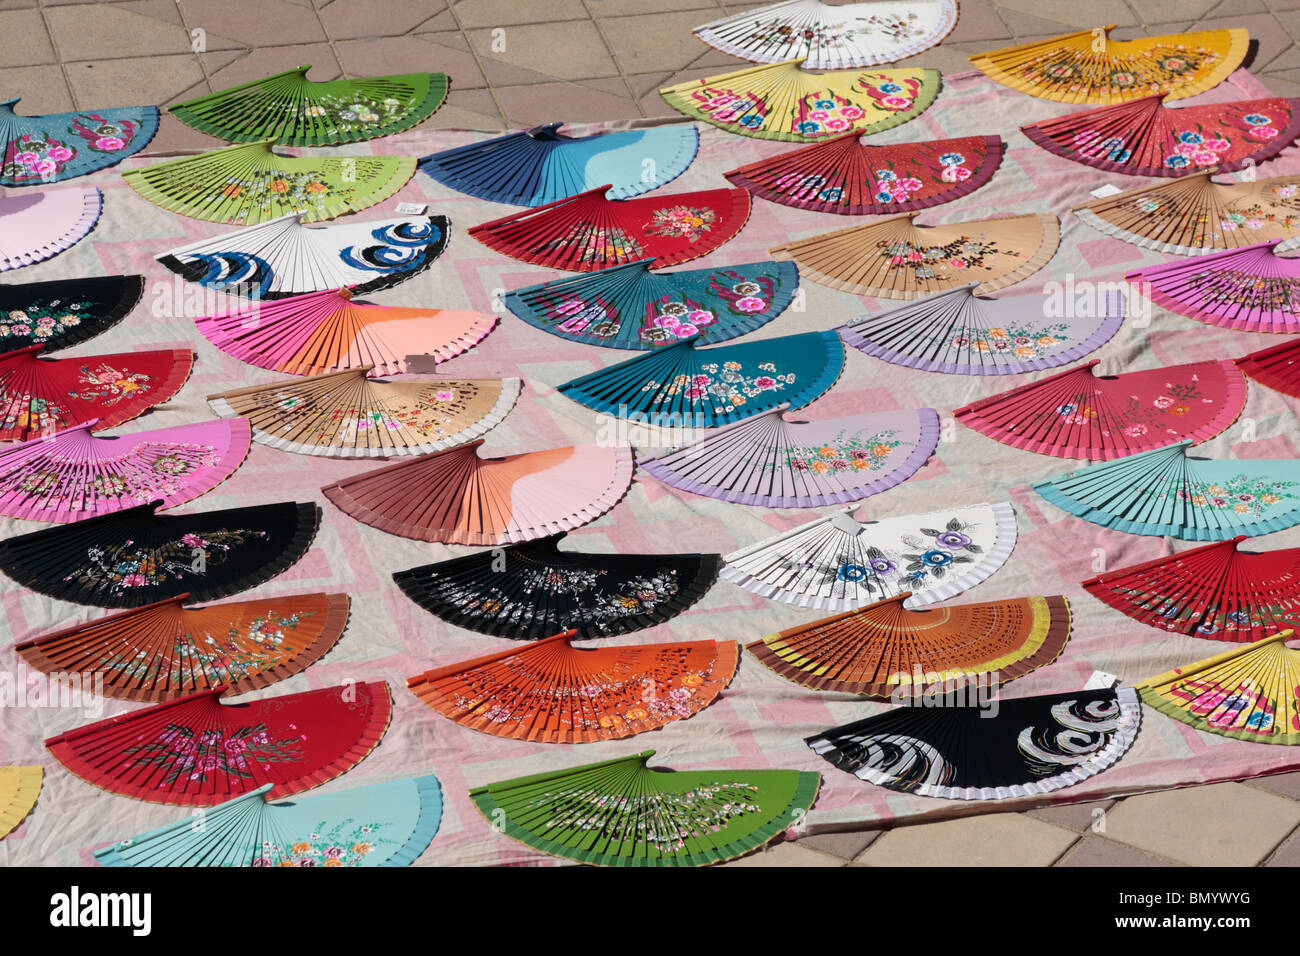 A display of painted Andalucian fans laid out for sale in the Plaza de Espana in Seville Andalucia Spain Europe Stock Photo